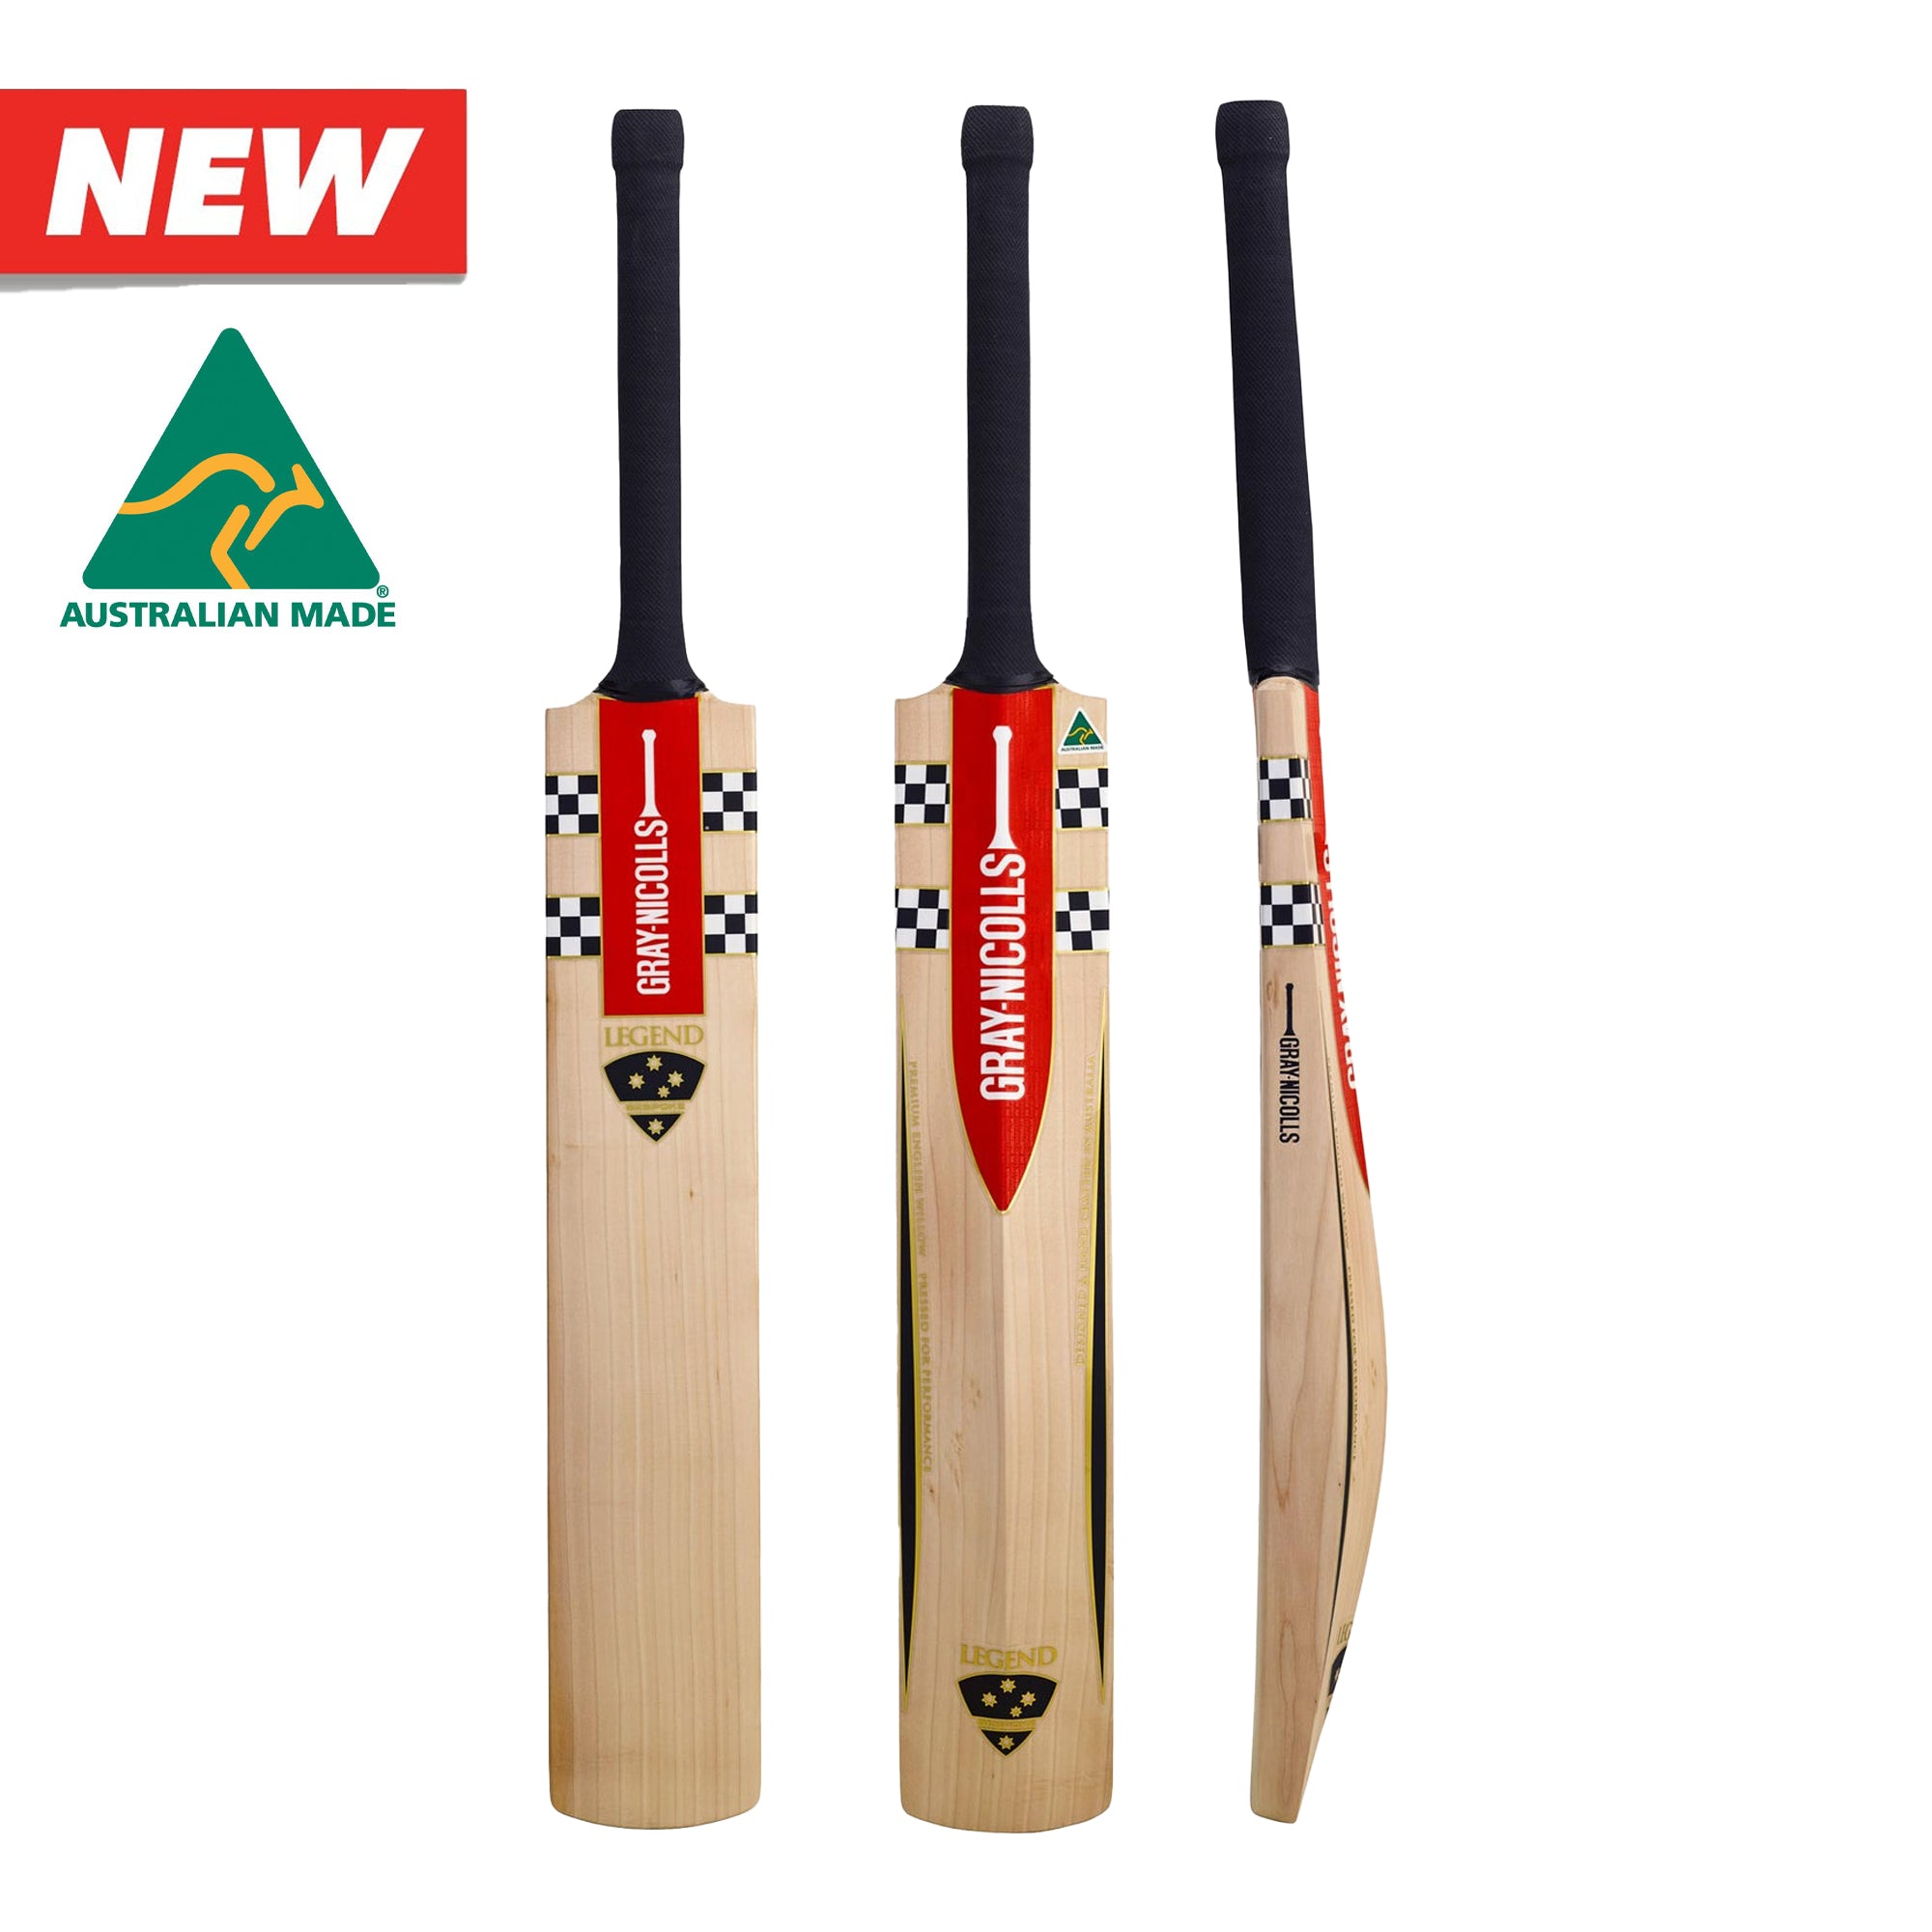 Gray-Nicolls Legend All In One Deal